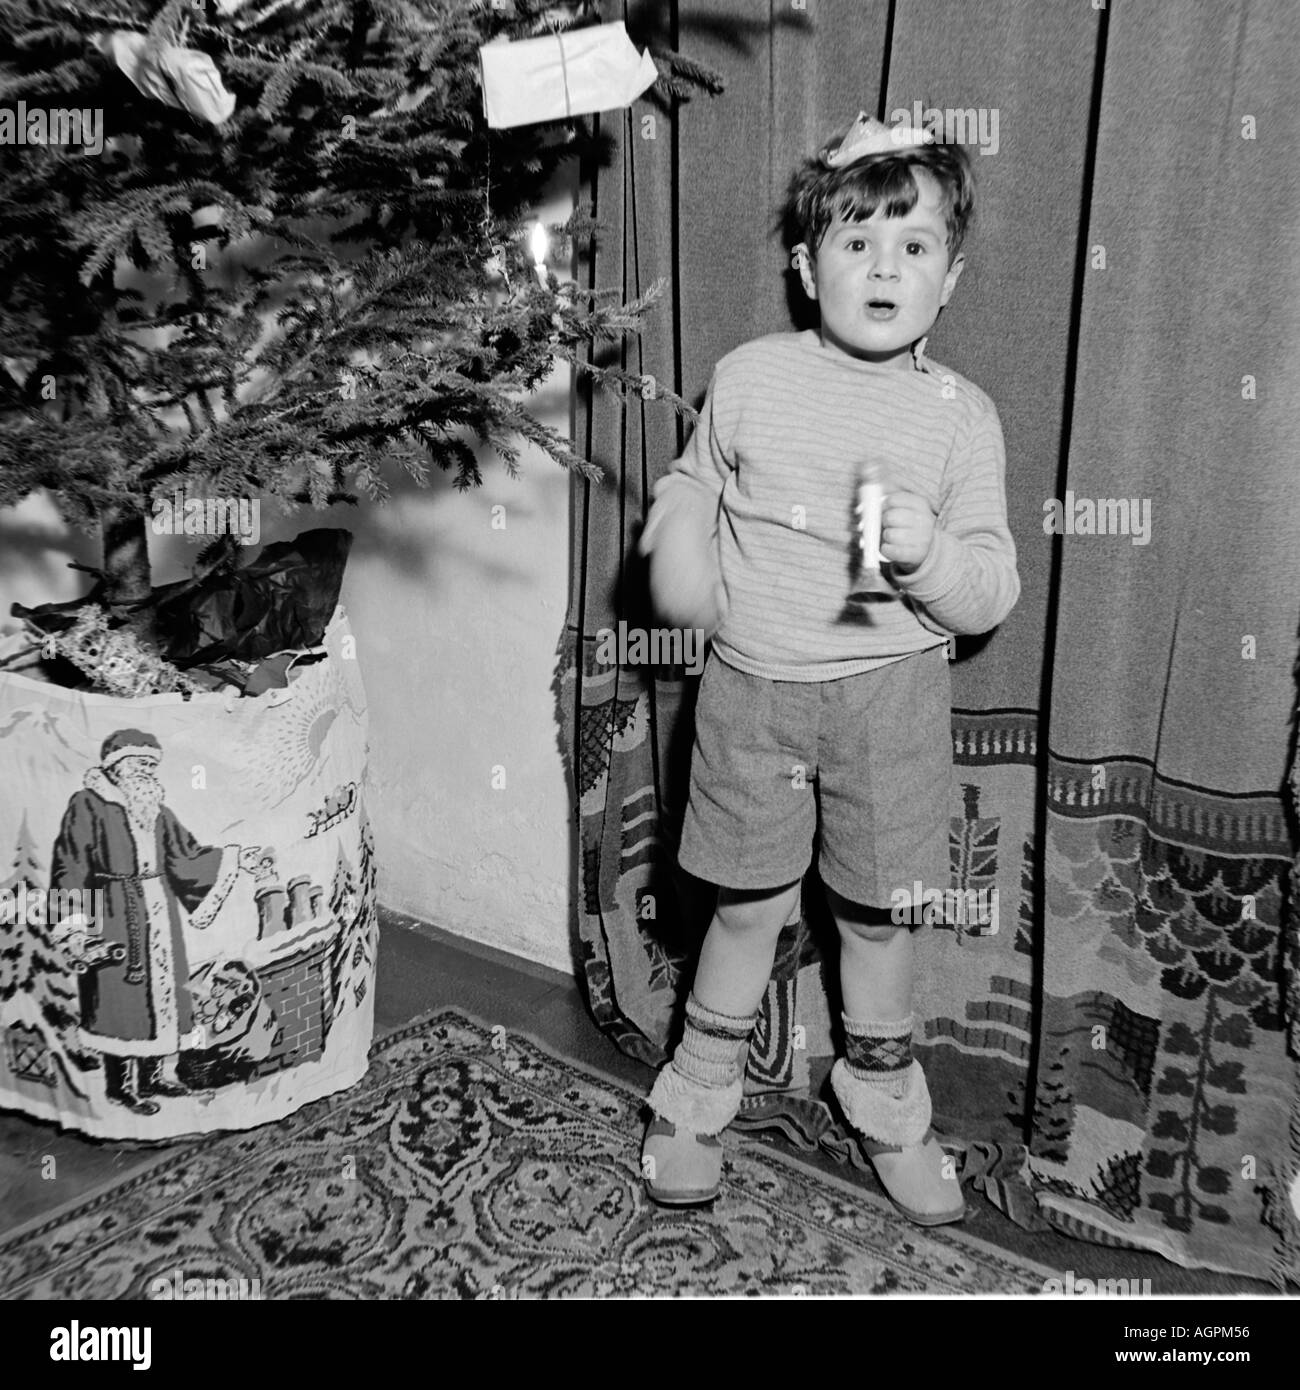 OLD VINTAGE FAMILY SNAPSHOT PHOTOGRAPH OF YOUNG BOY WEARING PARTY HAT PLAYING WITH TOY TRUMPET NEXT TO CHRISTMAS TREE Stock Photo